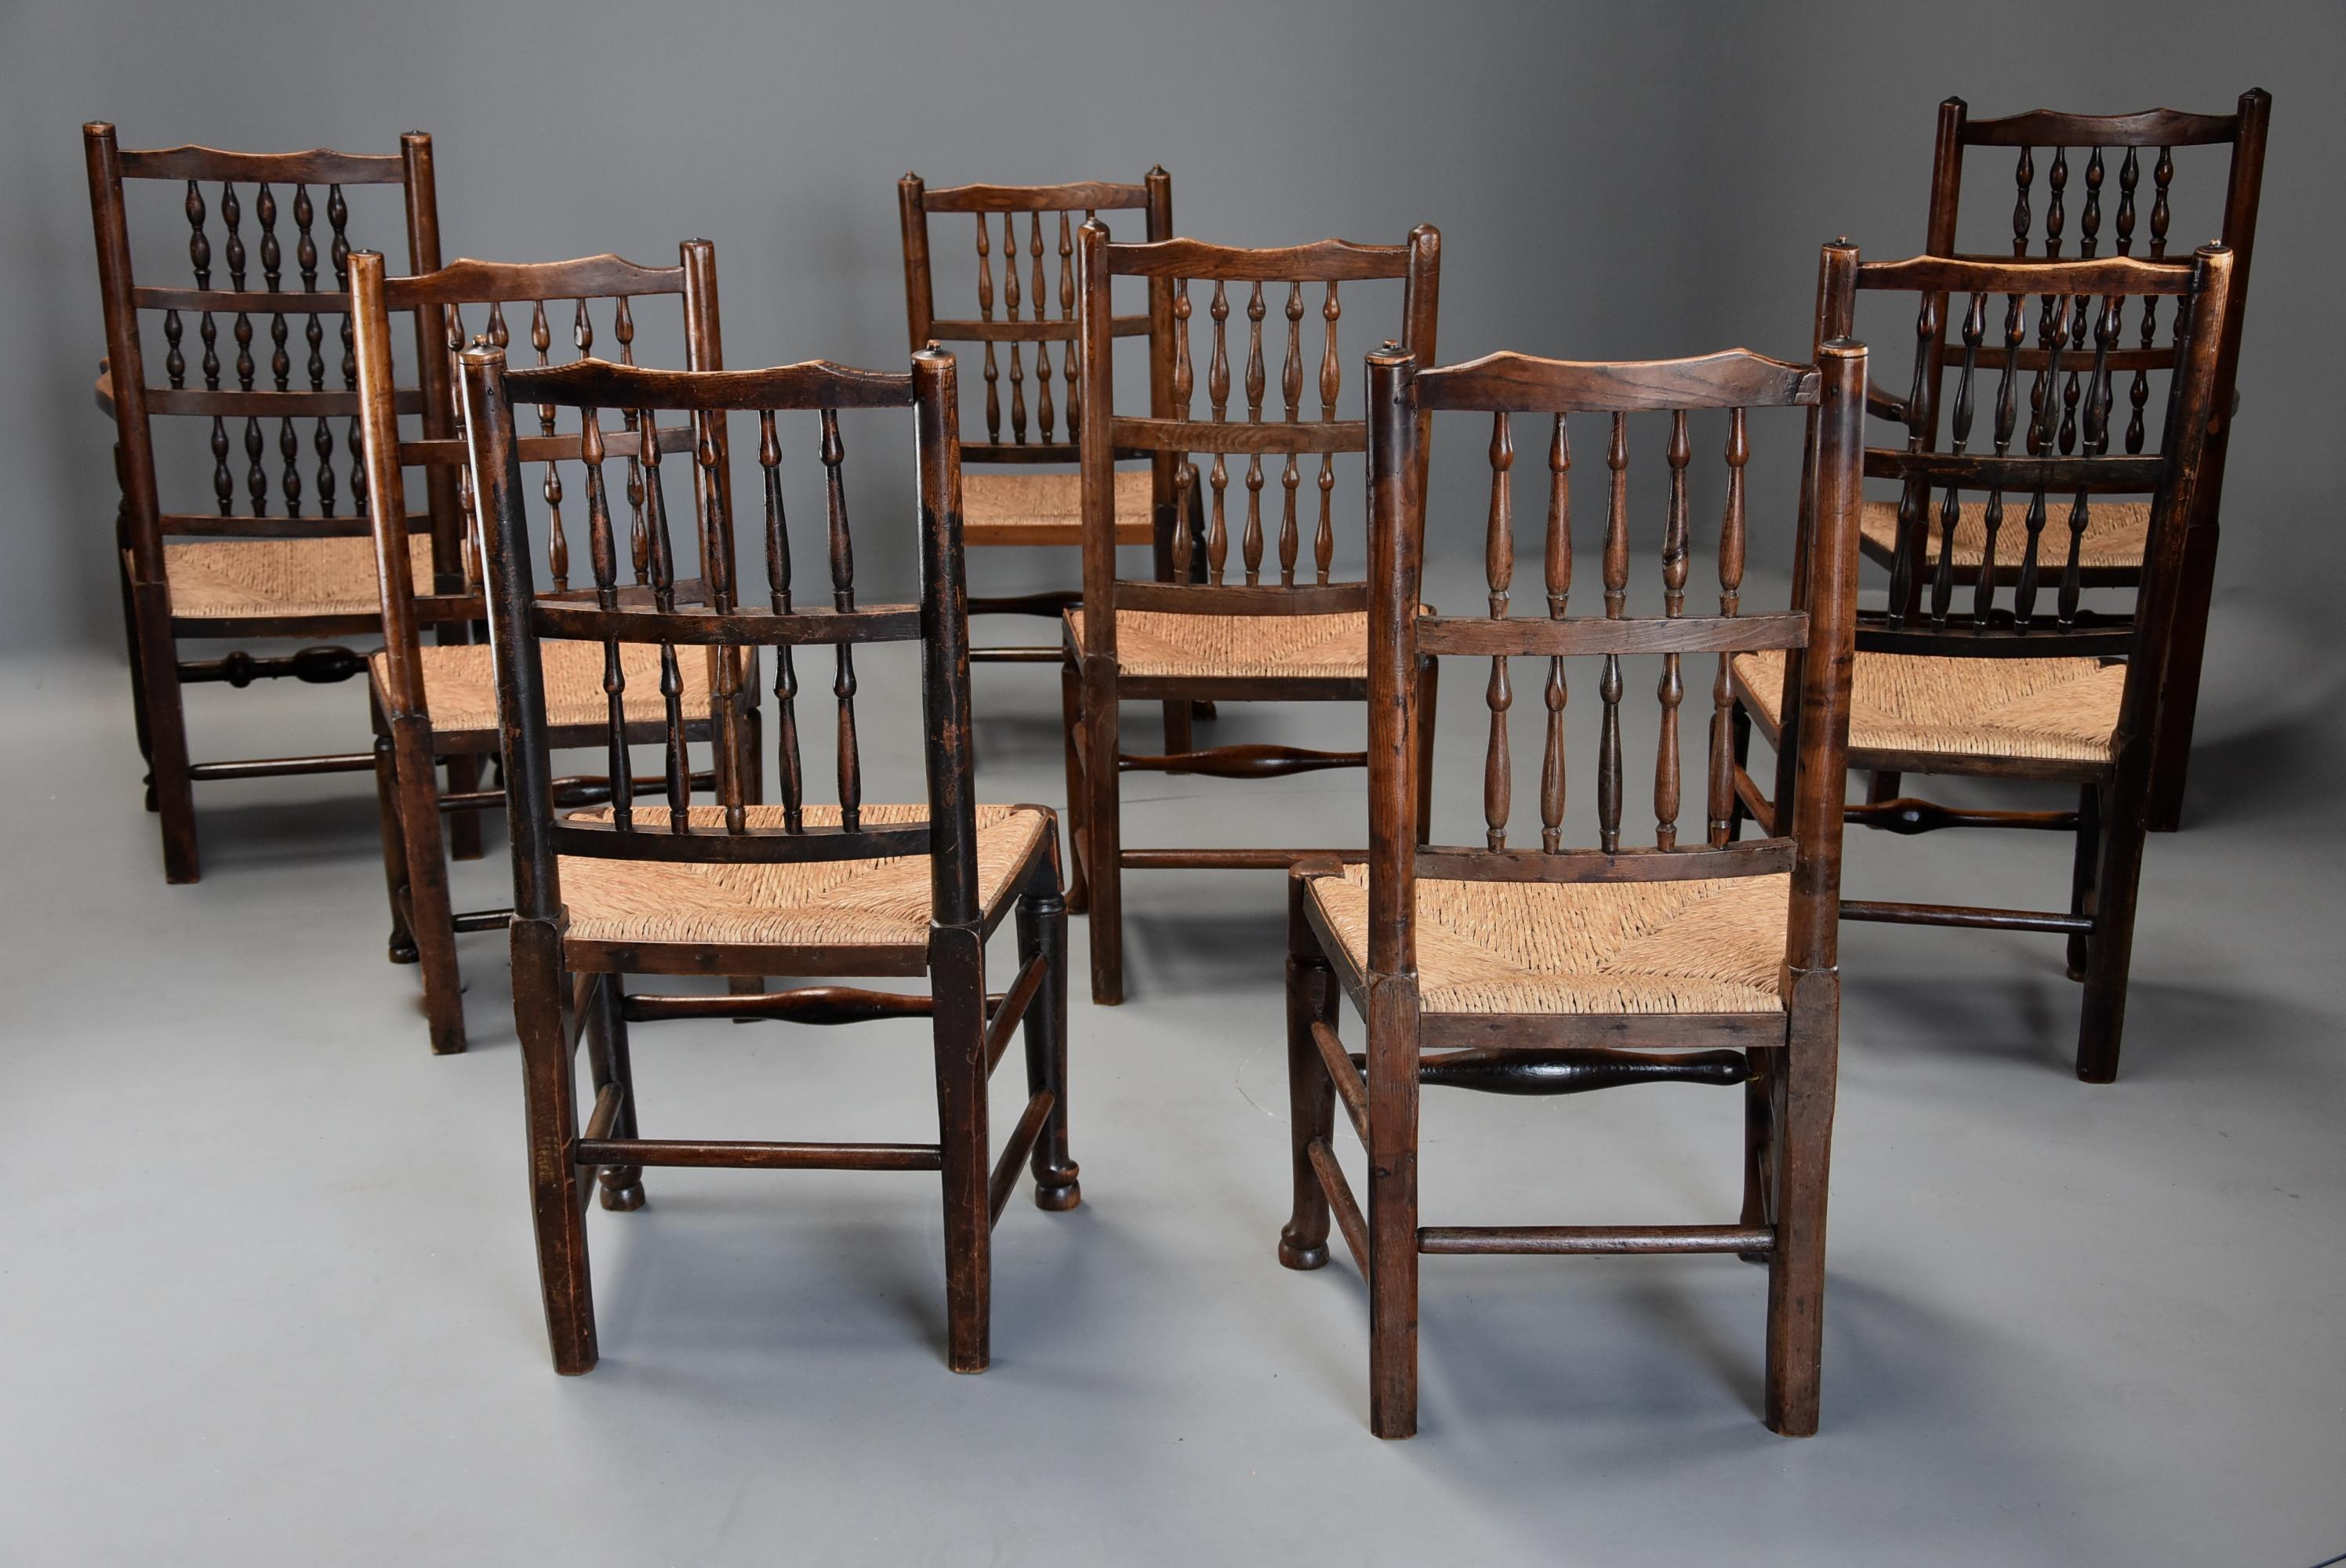 Matched Set of Eight Mid-19th Century Ash Spindle Back Chairs of Superb Patina For Sale 8